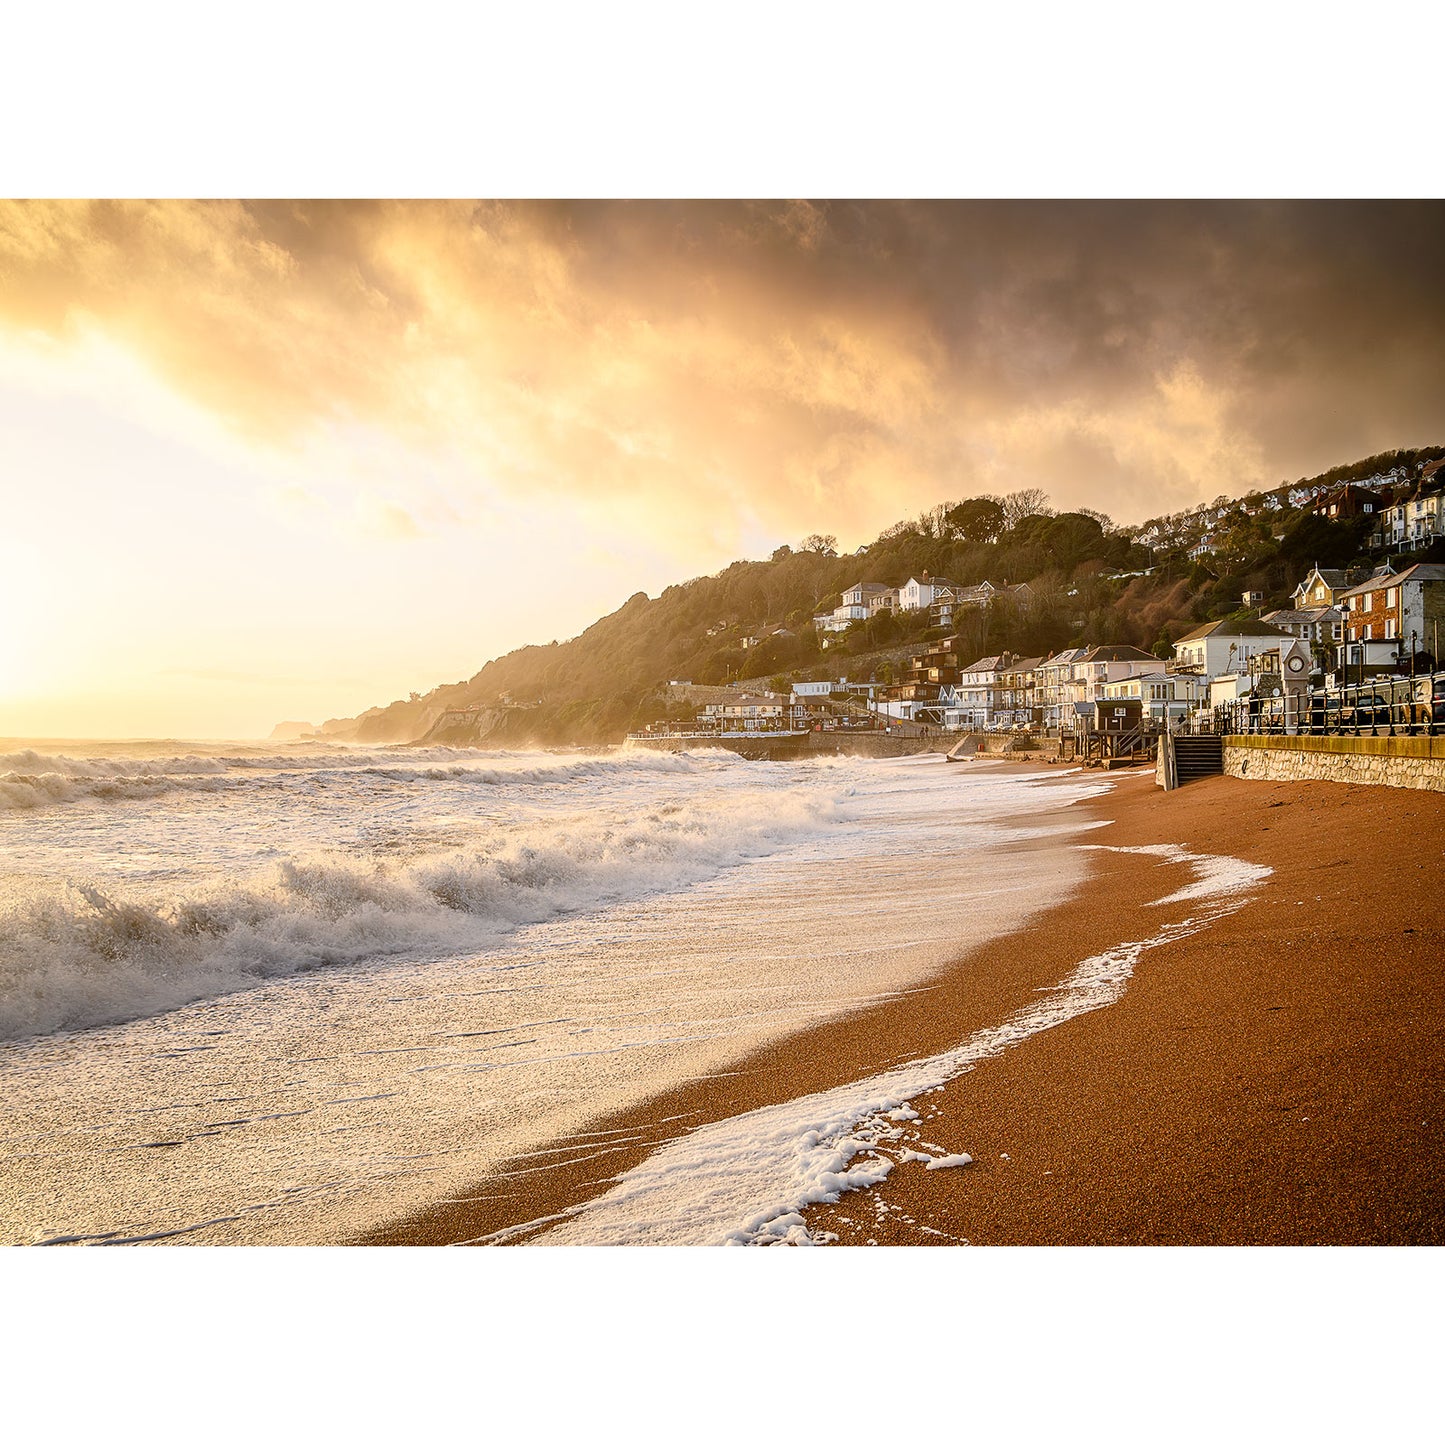 Seaside town at sunset on the Isle of Wight with waves crashing onto a sandy beach. - Ventnor by Available Light Photography